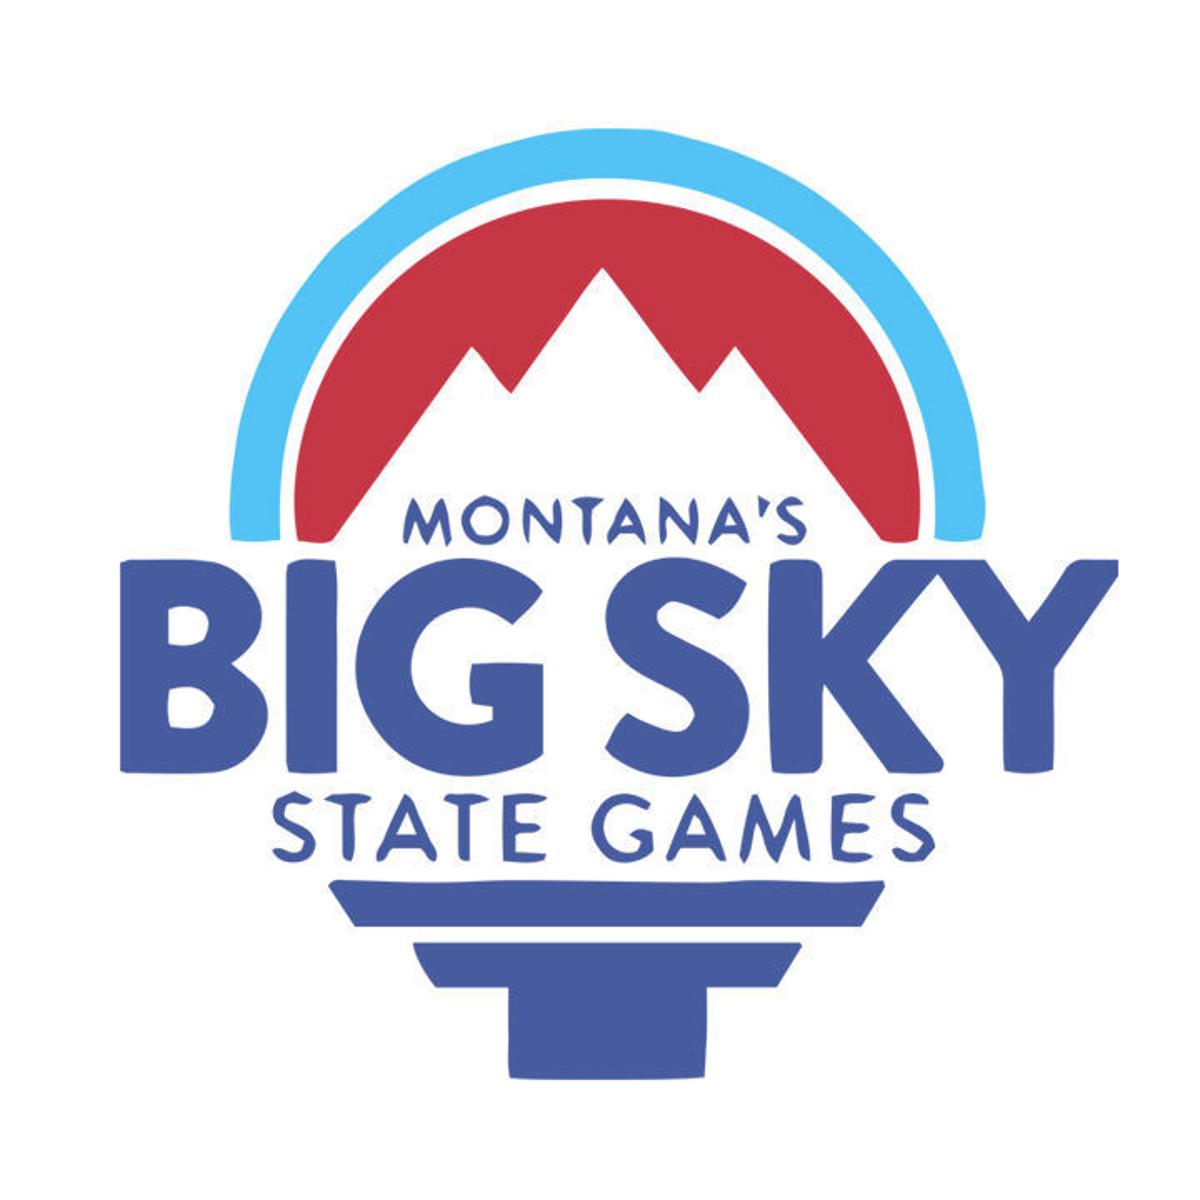 with-main-event-a-week-away-several-big-sky-state-games-events-are-this-weekend-406mtsports-406mtsports-com